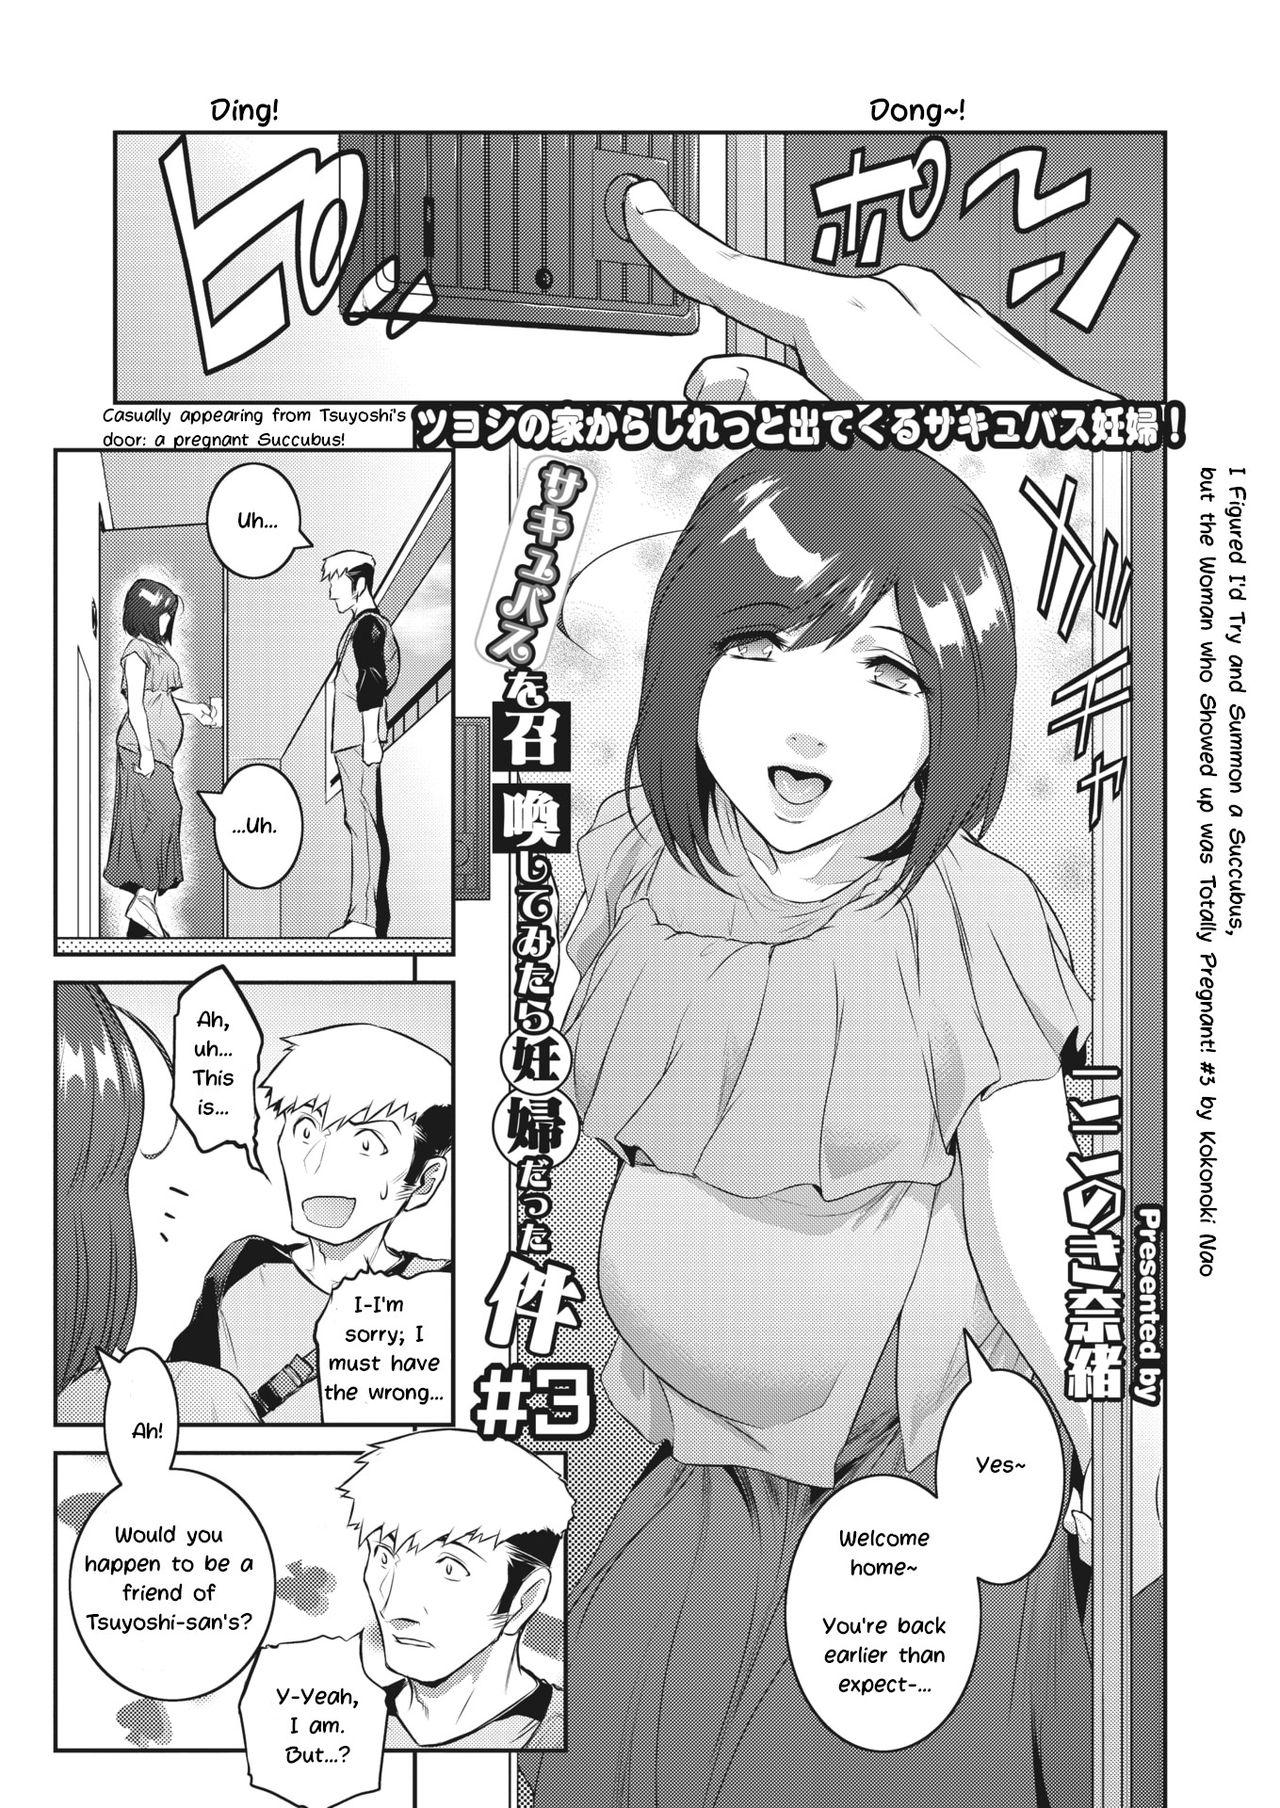 Chat Succubus o Shoukan Shitemitara Ninpu datta Ken | I Figured I'd Try and Summon a Succubus, but... Ch. 2-3 Jerk Off Instruction - Page 5